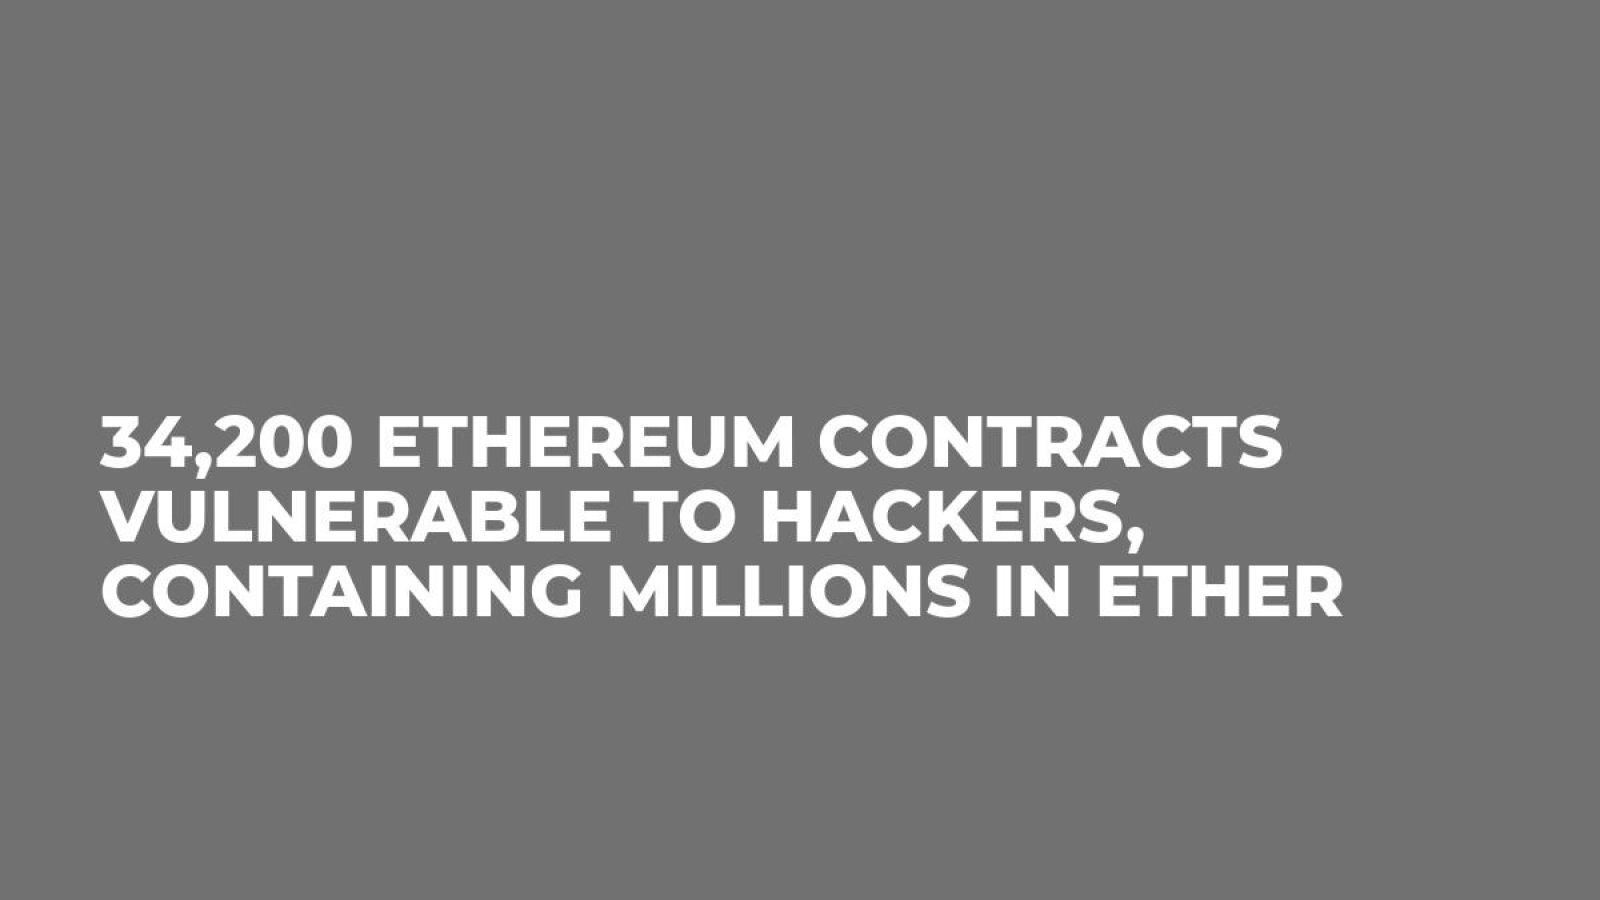 34,200 Ethereum Contracts Vulnerable to Hackers, Containing Millions in Ether